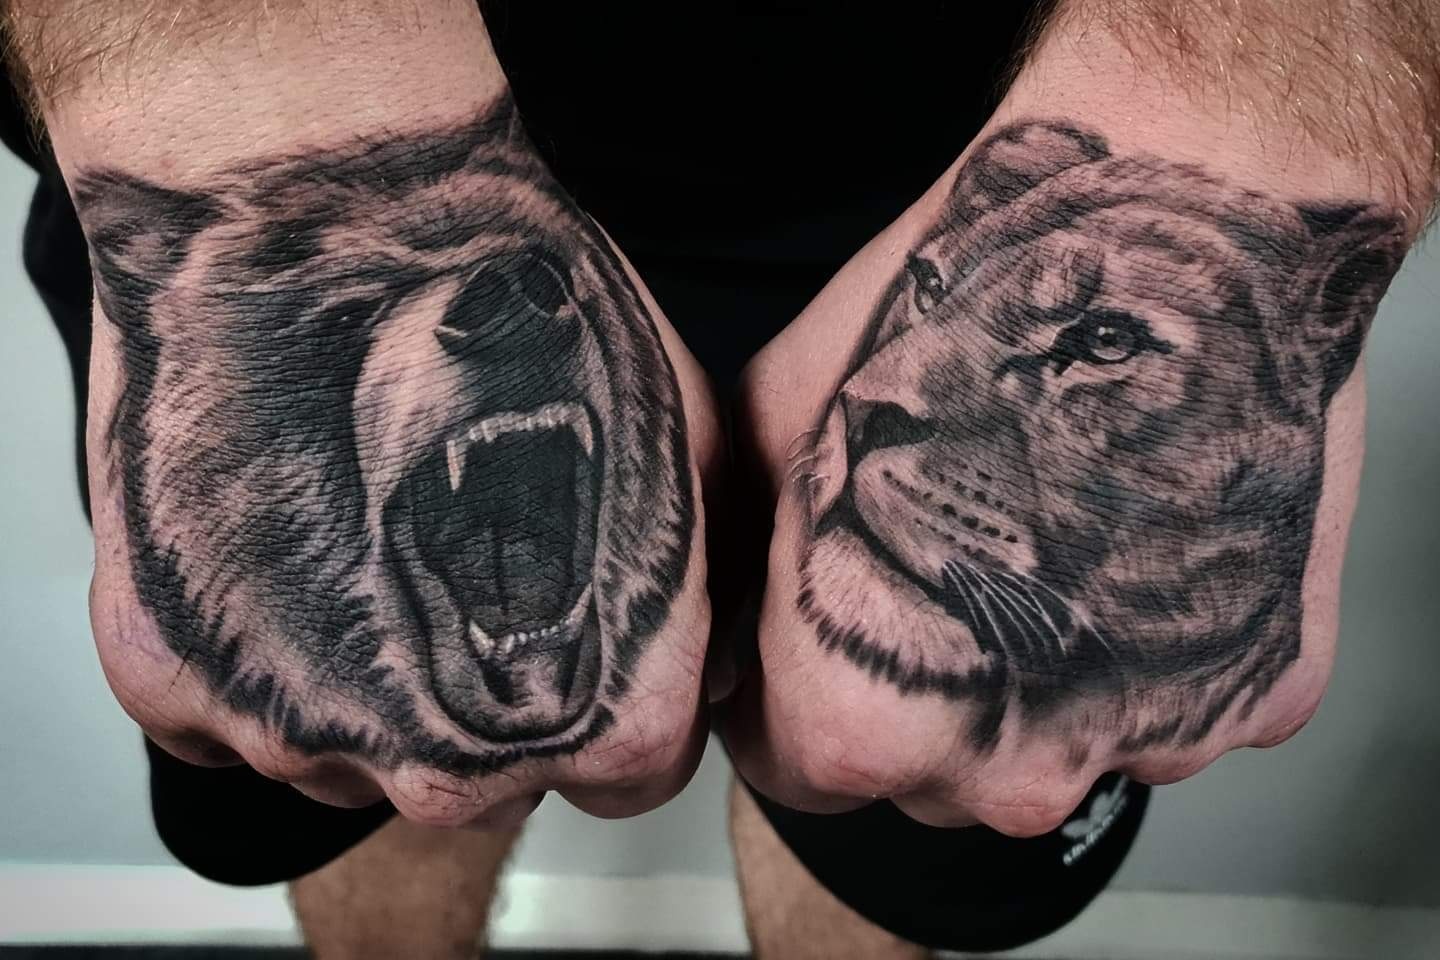 Left Hand Path Tattoos  Christchurch  Do you have a pet or favourite  animal that you would like tattooed Lara loves tattooing animalsbirds etc  she would love to make a piece